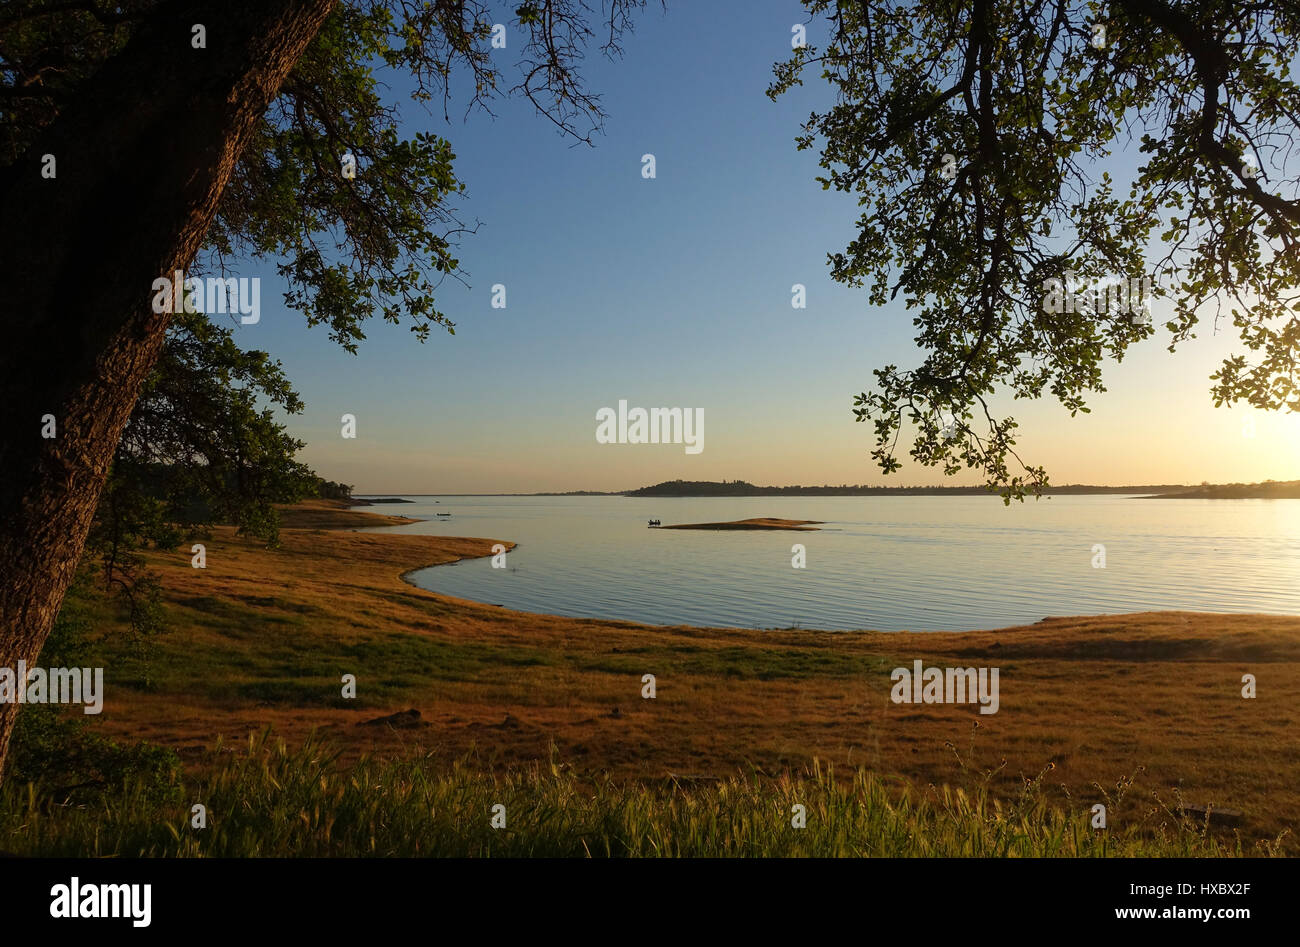 A calm lake in the late afternoon, in the distance, there are fisherman on a small boat.  A tree frames the image.  Folsom Lake, California Stock Photo